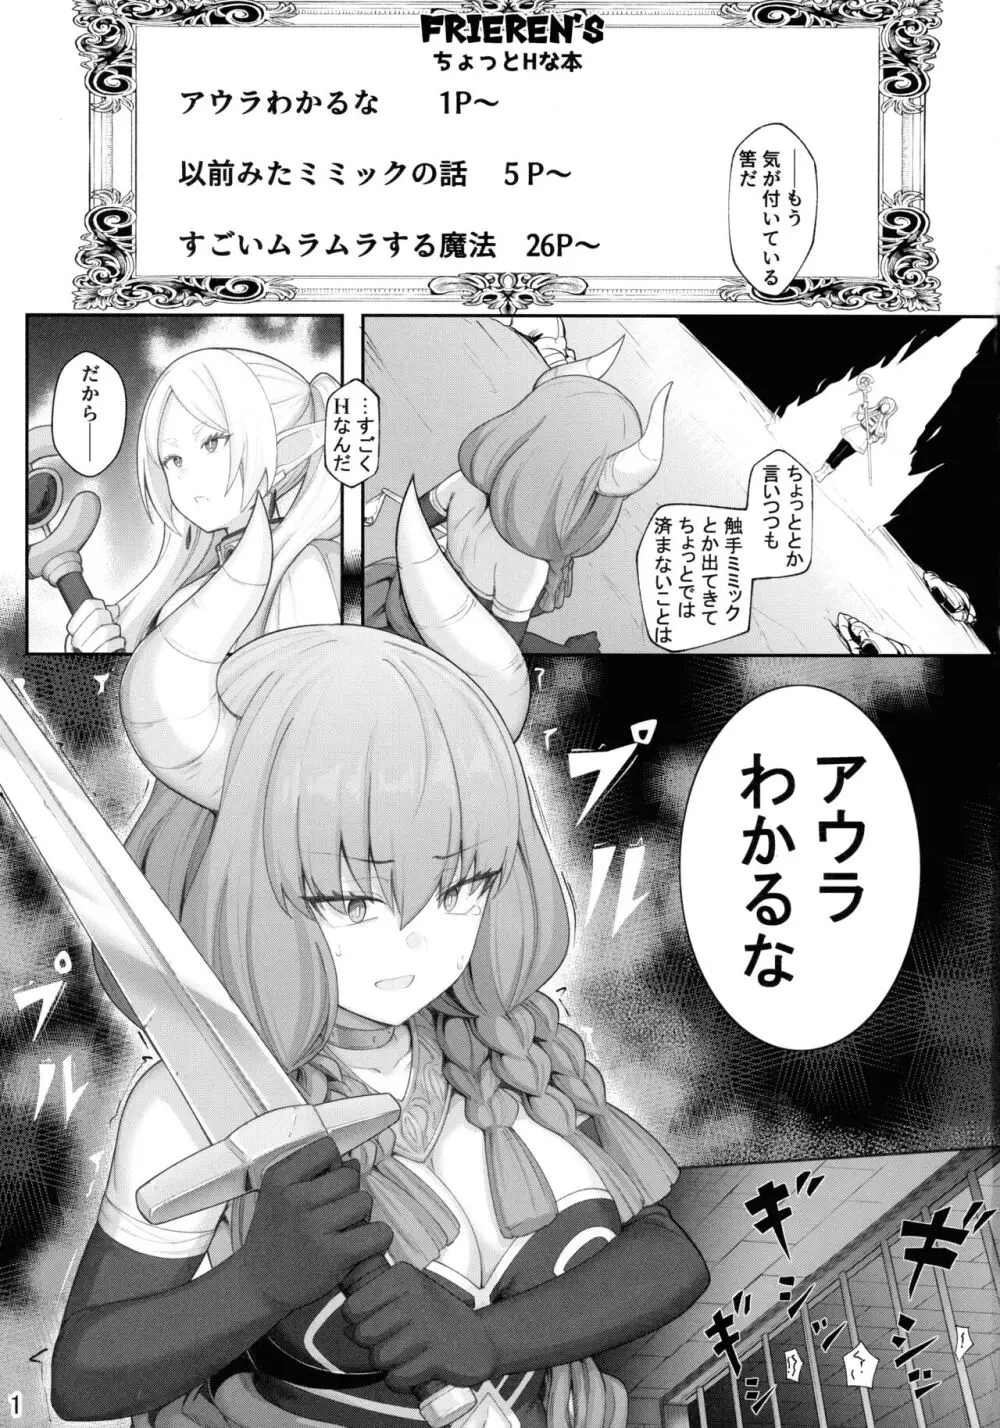 FRIEREN'S ちょっとHな本 Page.3